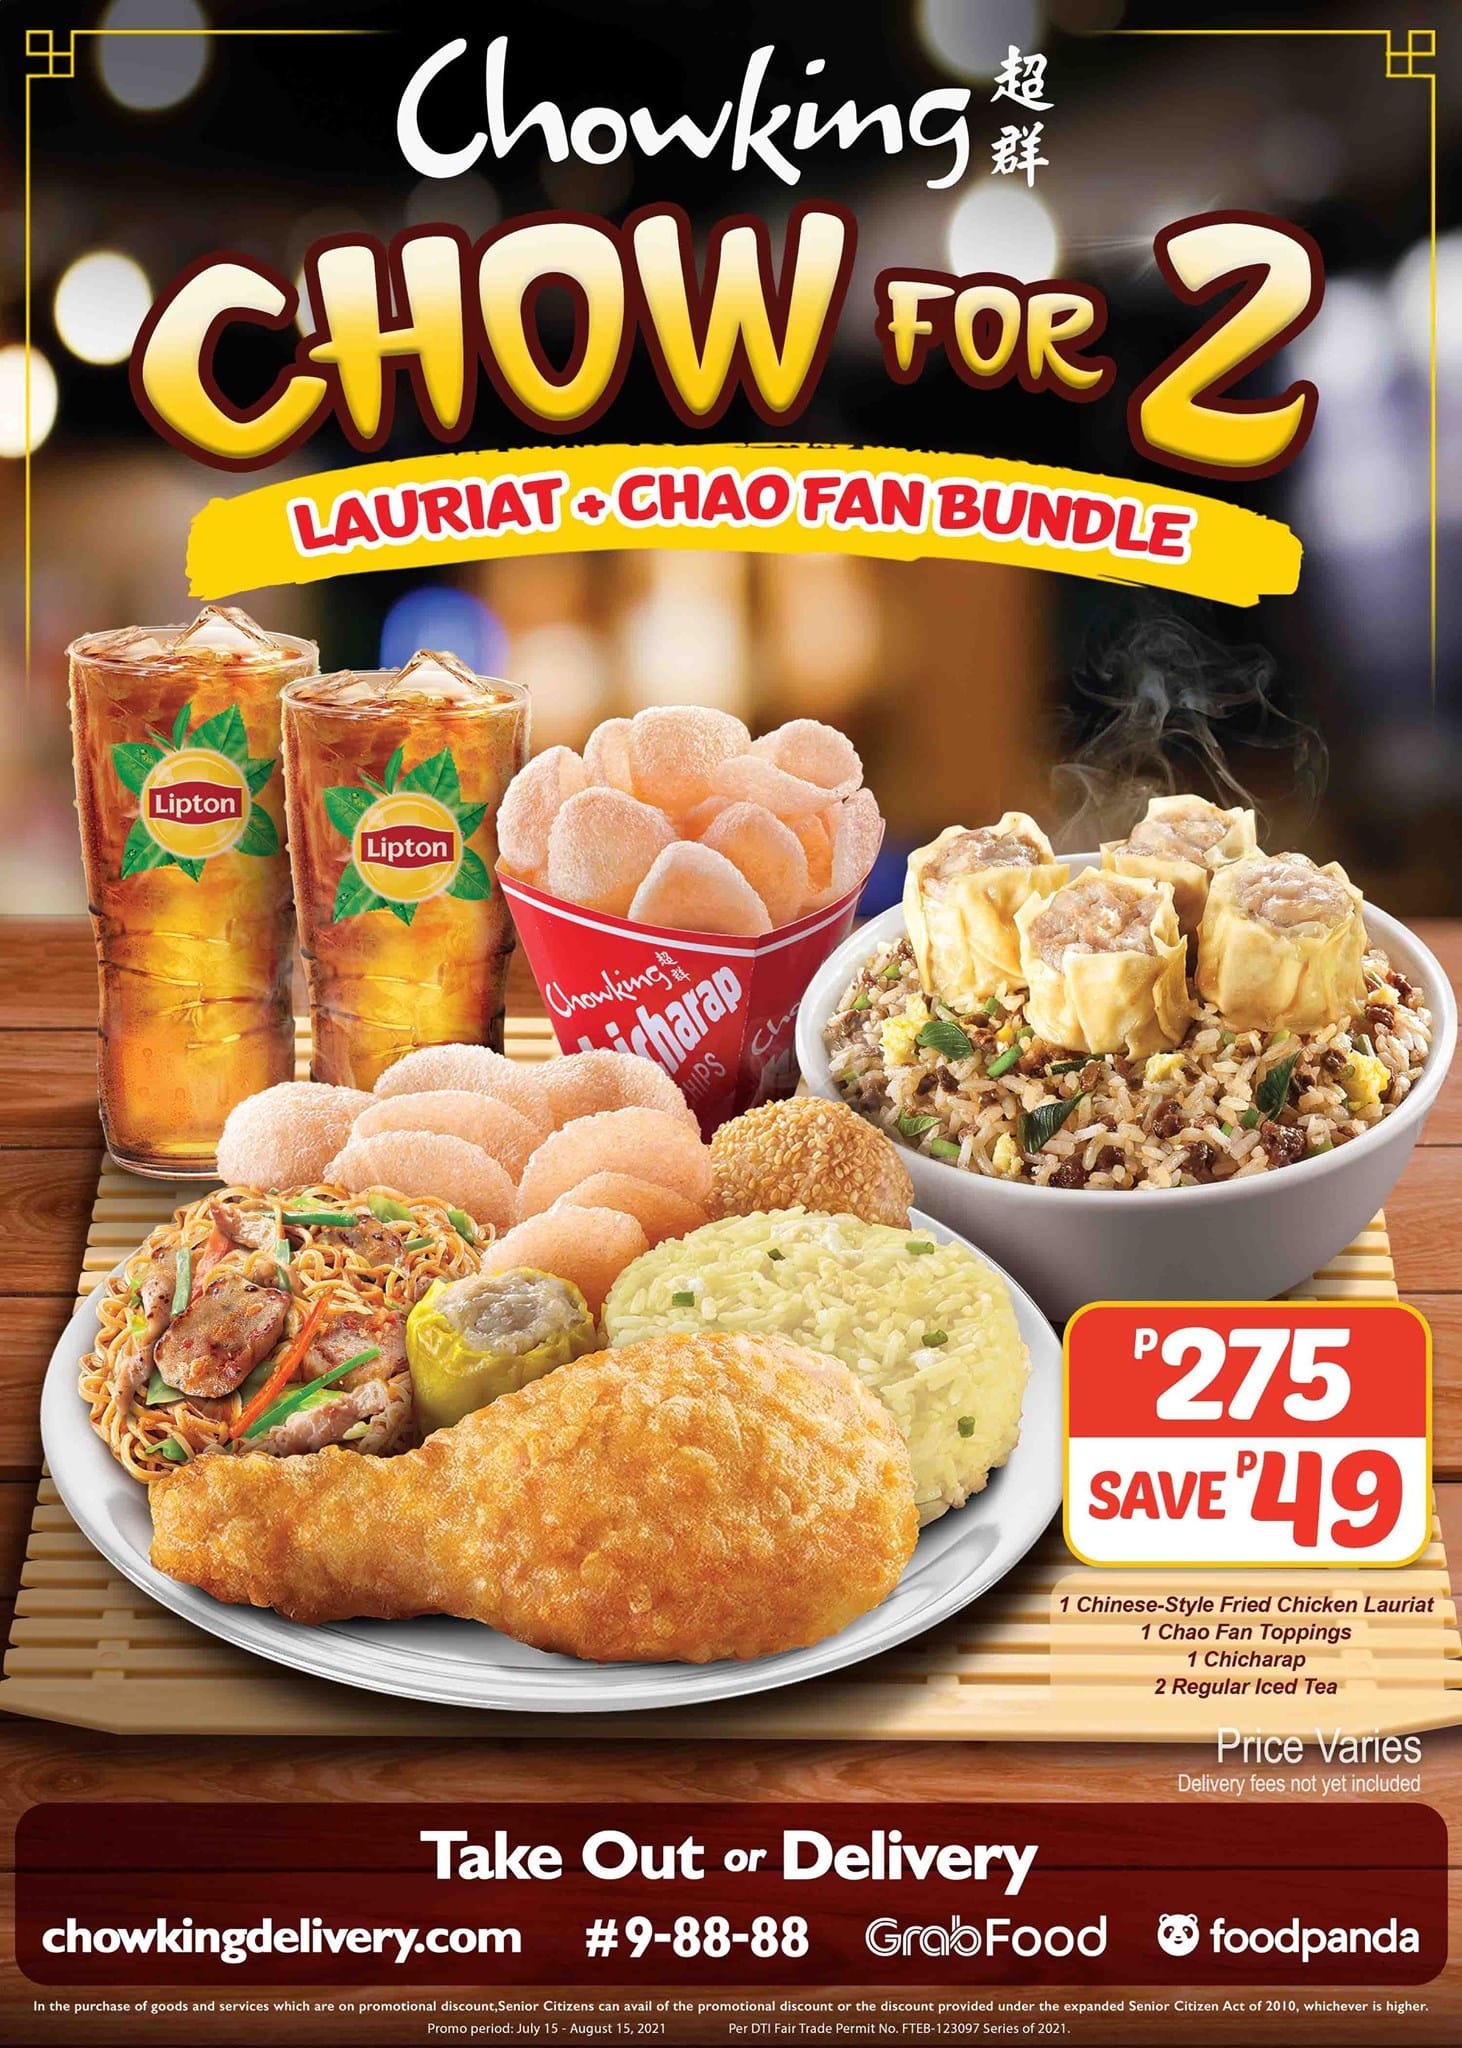 Chowking Chow for 2 Bundle Promo Deals Pinoy